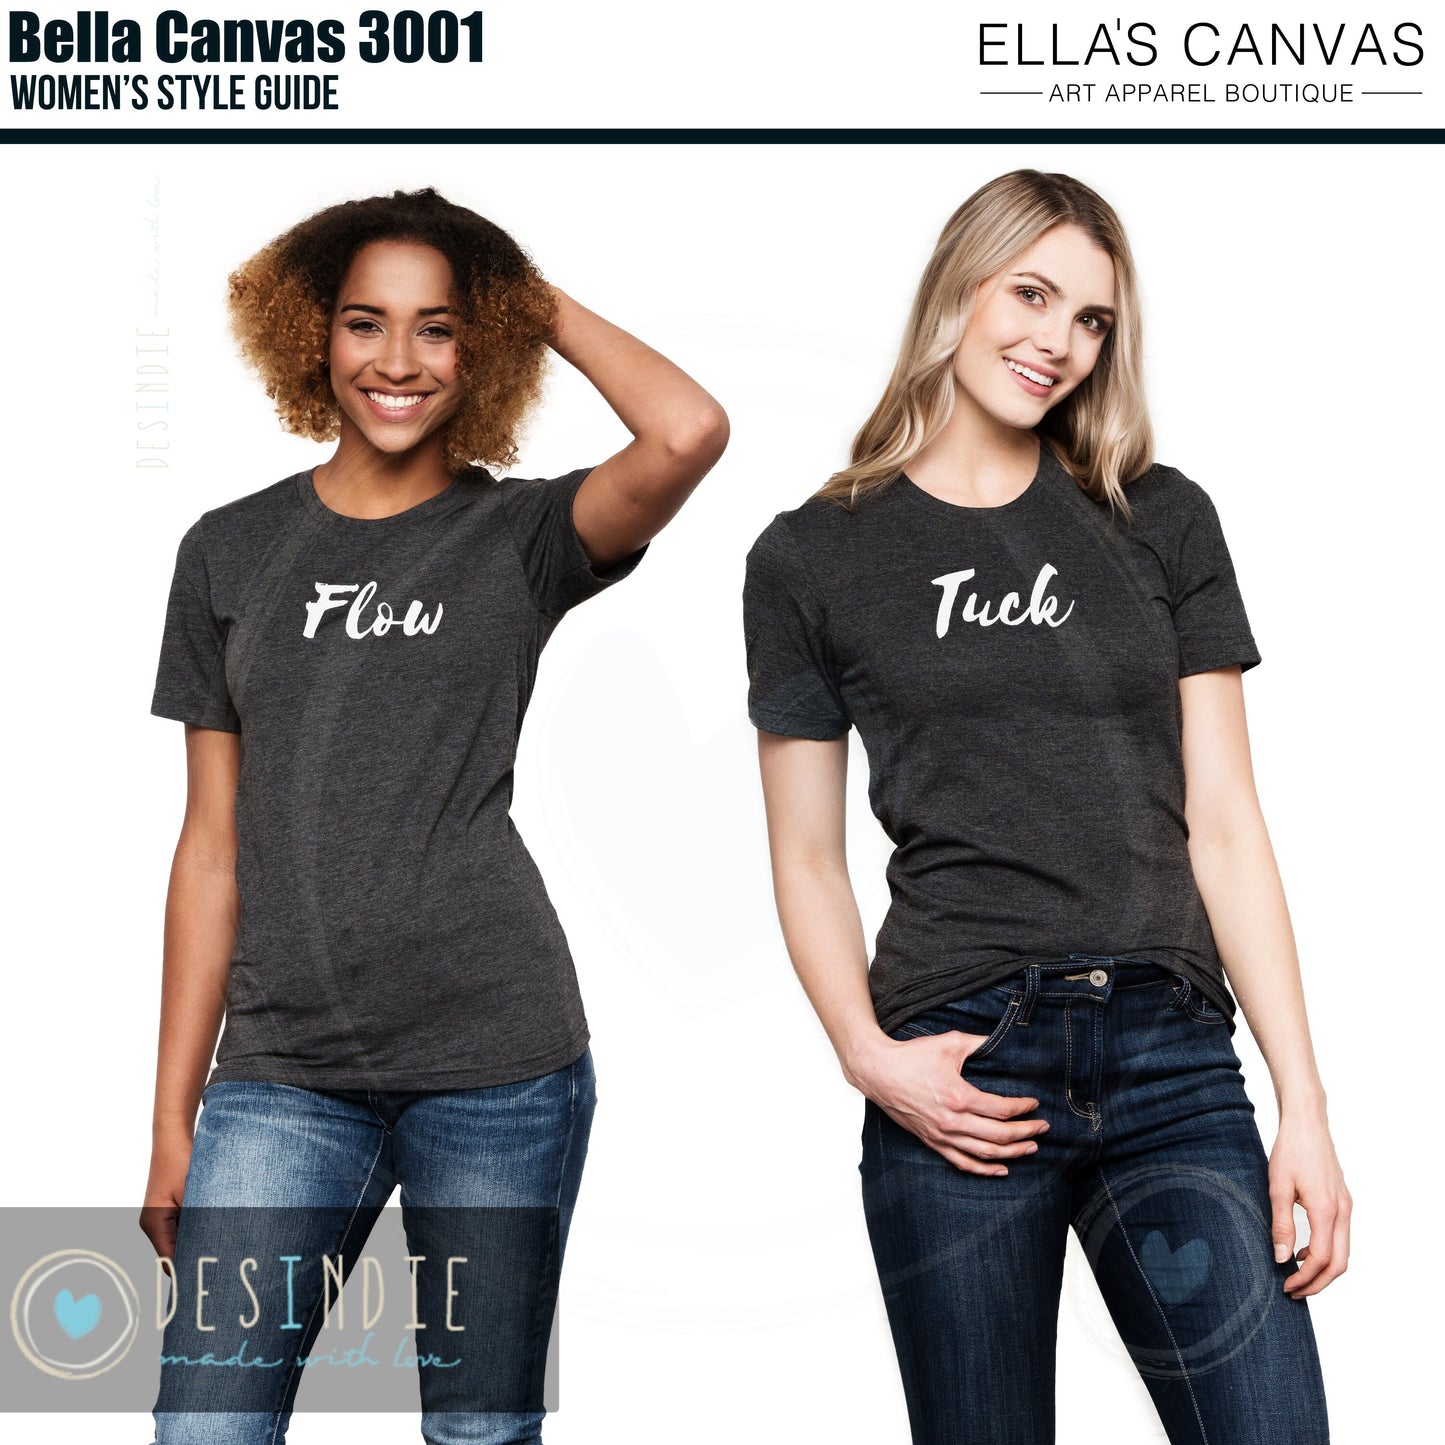 Hidden Pictures Activi-Tees Soft Graphic Tees (Unisex for Women)